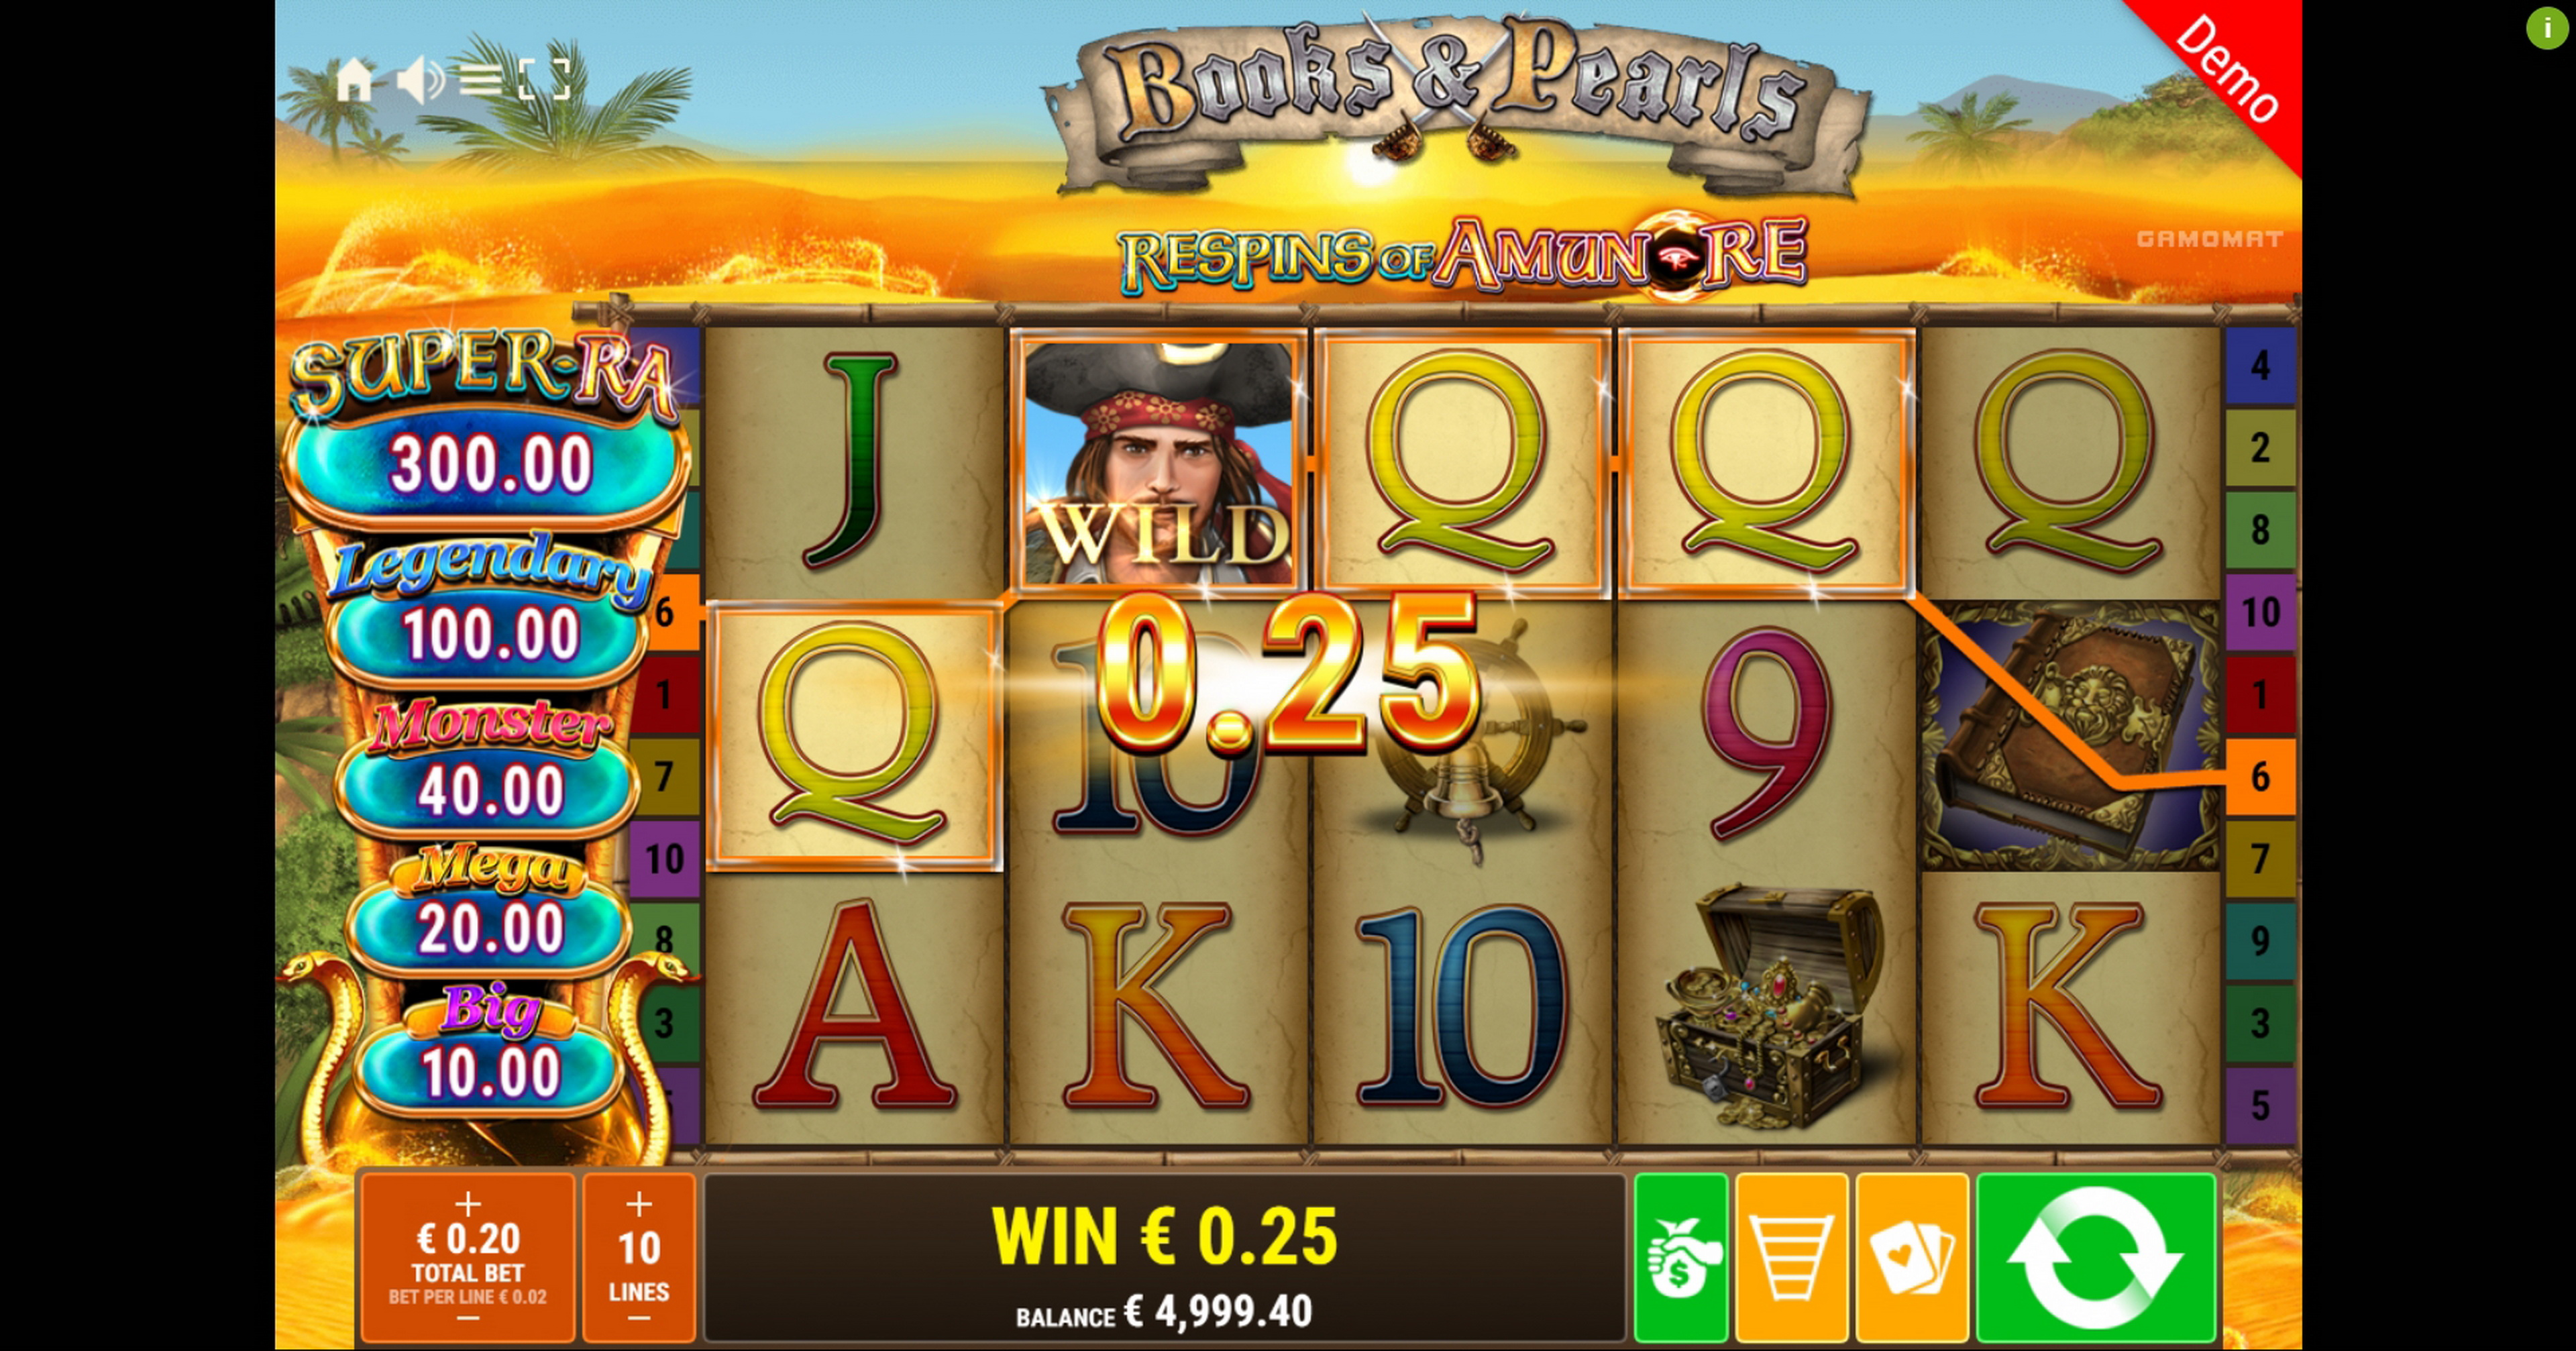 Win Money in Books and Pearls Respins of Amun-Re Free Slot Game by Gamomat